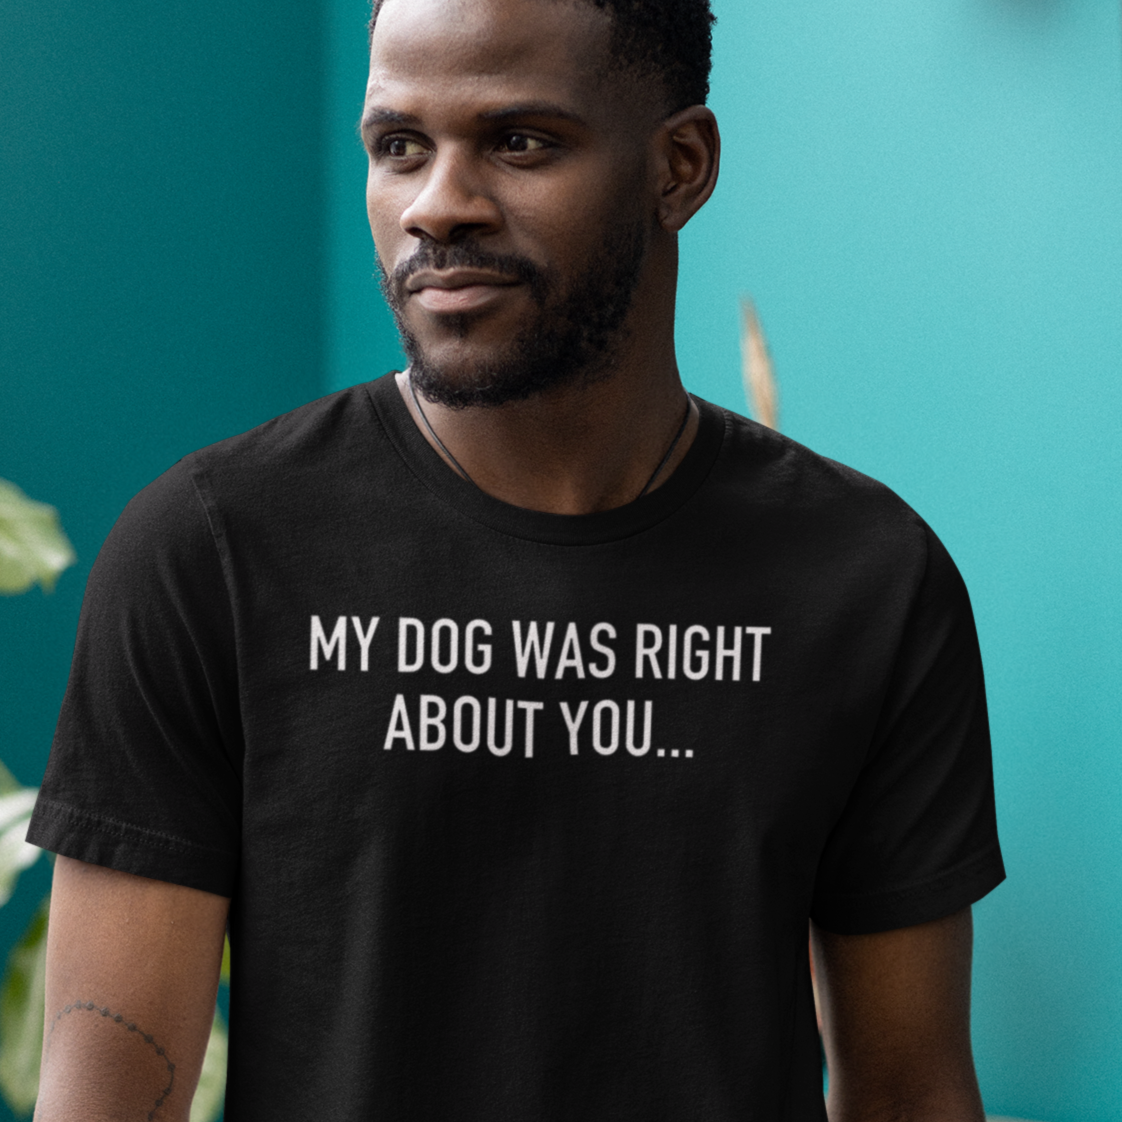 my-dog-was-right-about-you-black-t-shirt-mockup-of-a-bearded-man-wearing-a-bella-canvas-rounded-neck